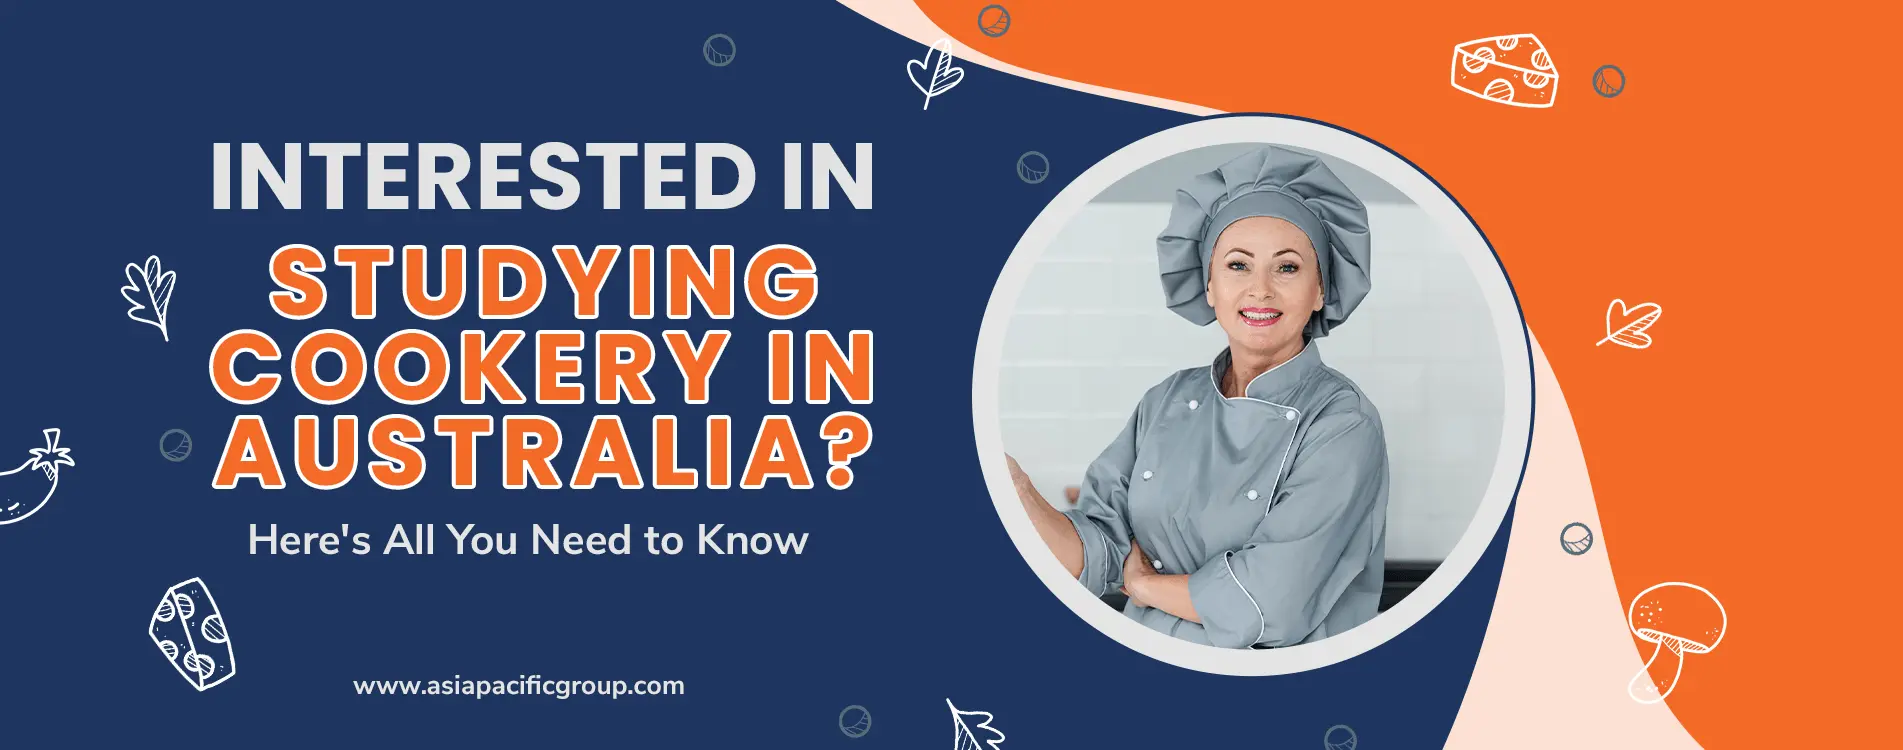 Interested in studying cookery in Australia? Here’s all you need to know!